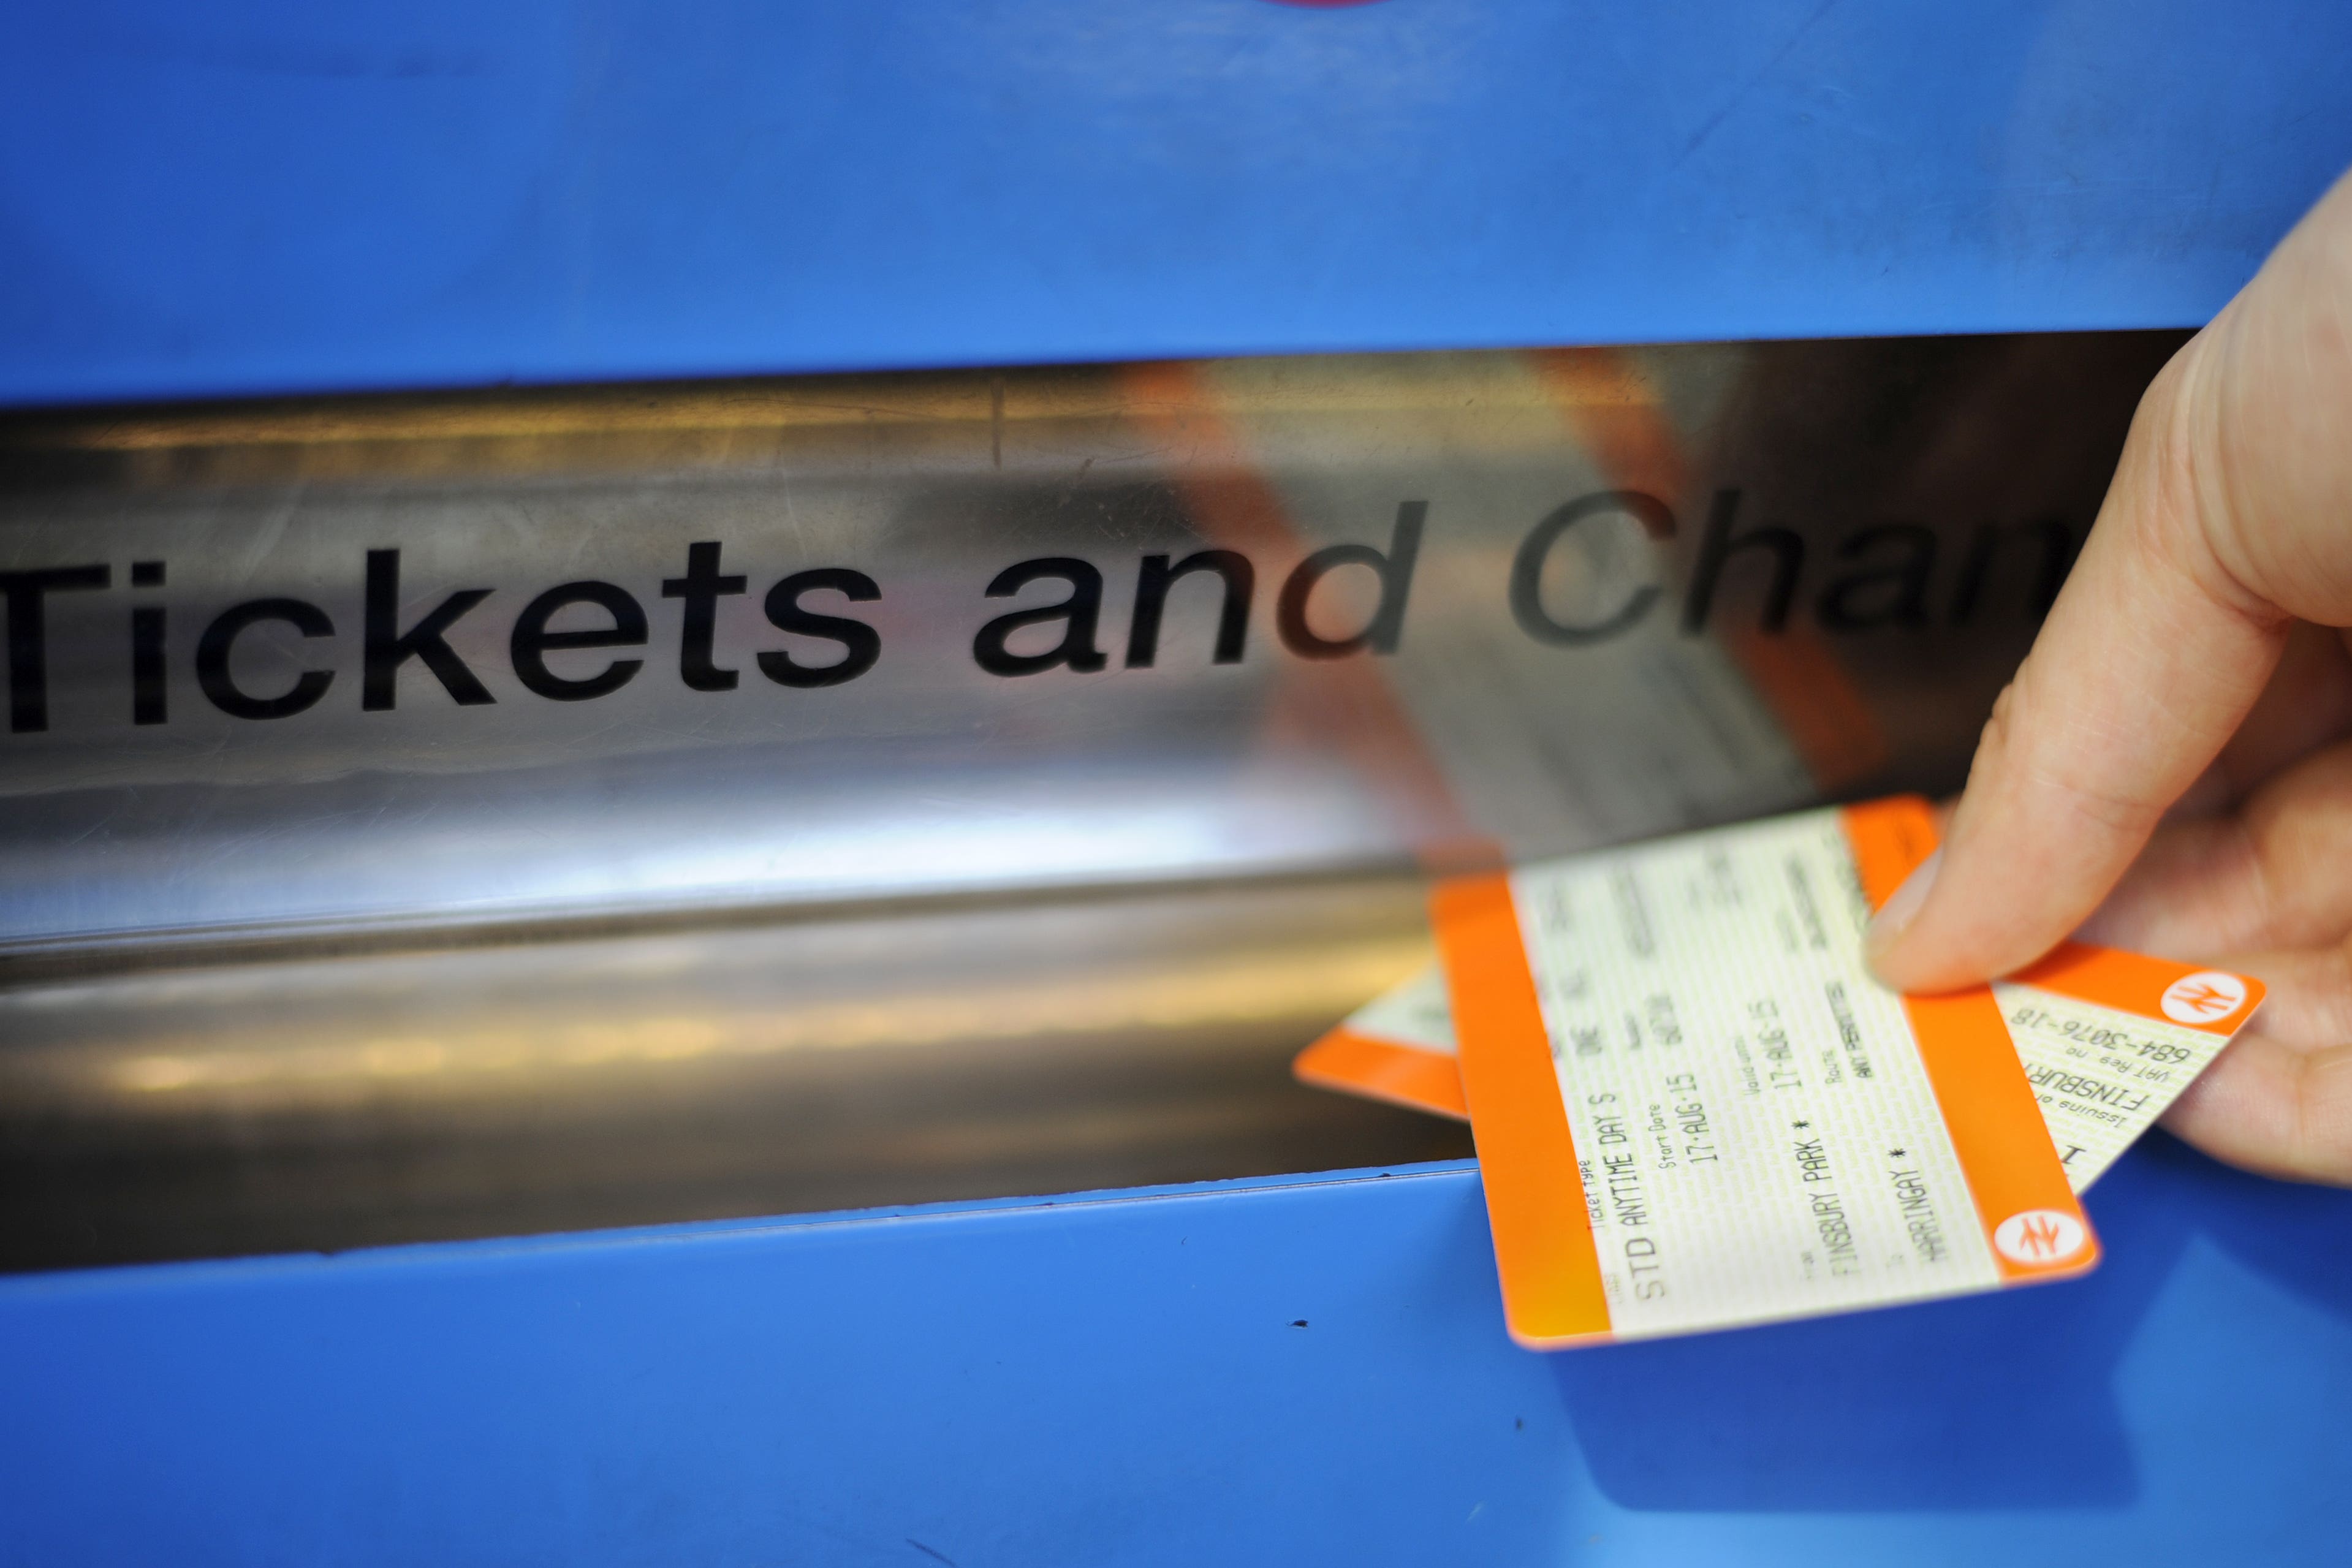 Rail fares will change based on demand under a new trial (Lauren Hurley/PA)